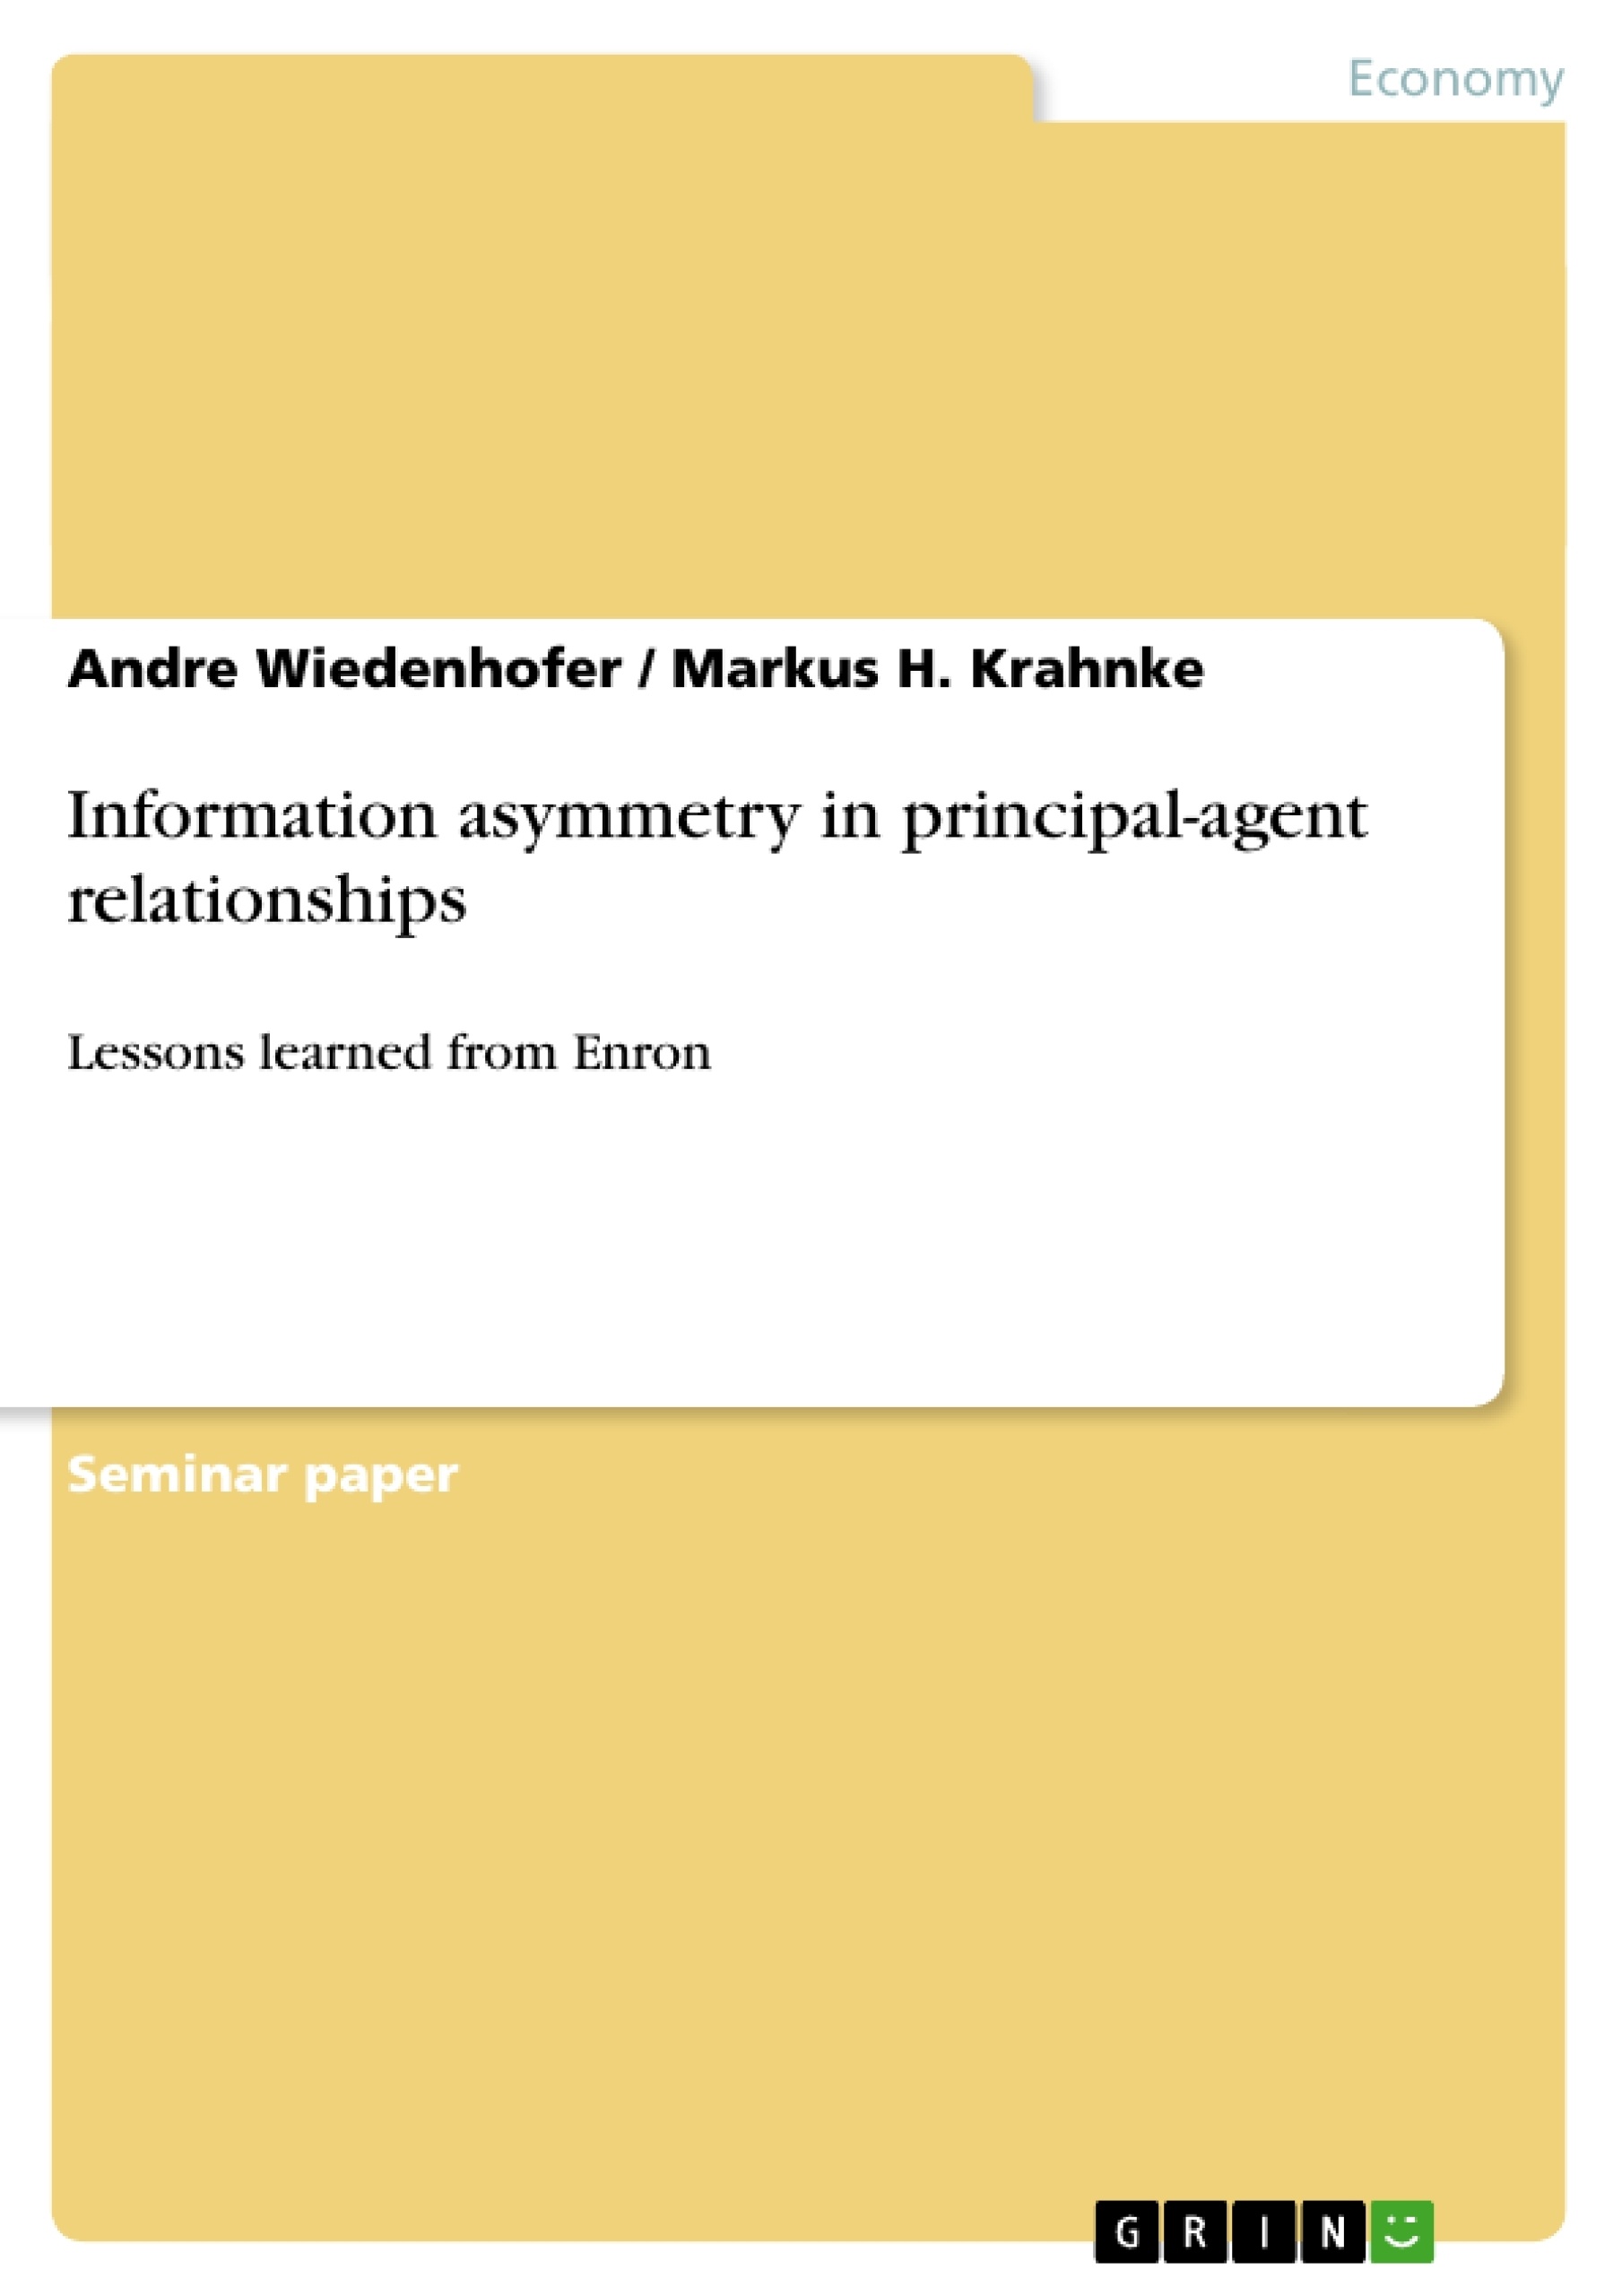 Title: Information asymmetry in principal-agent relationships